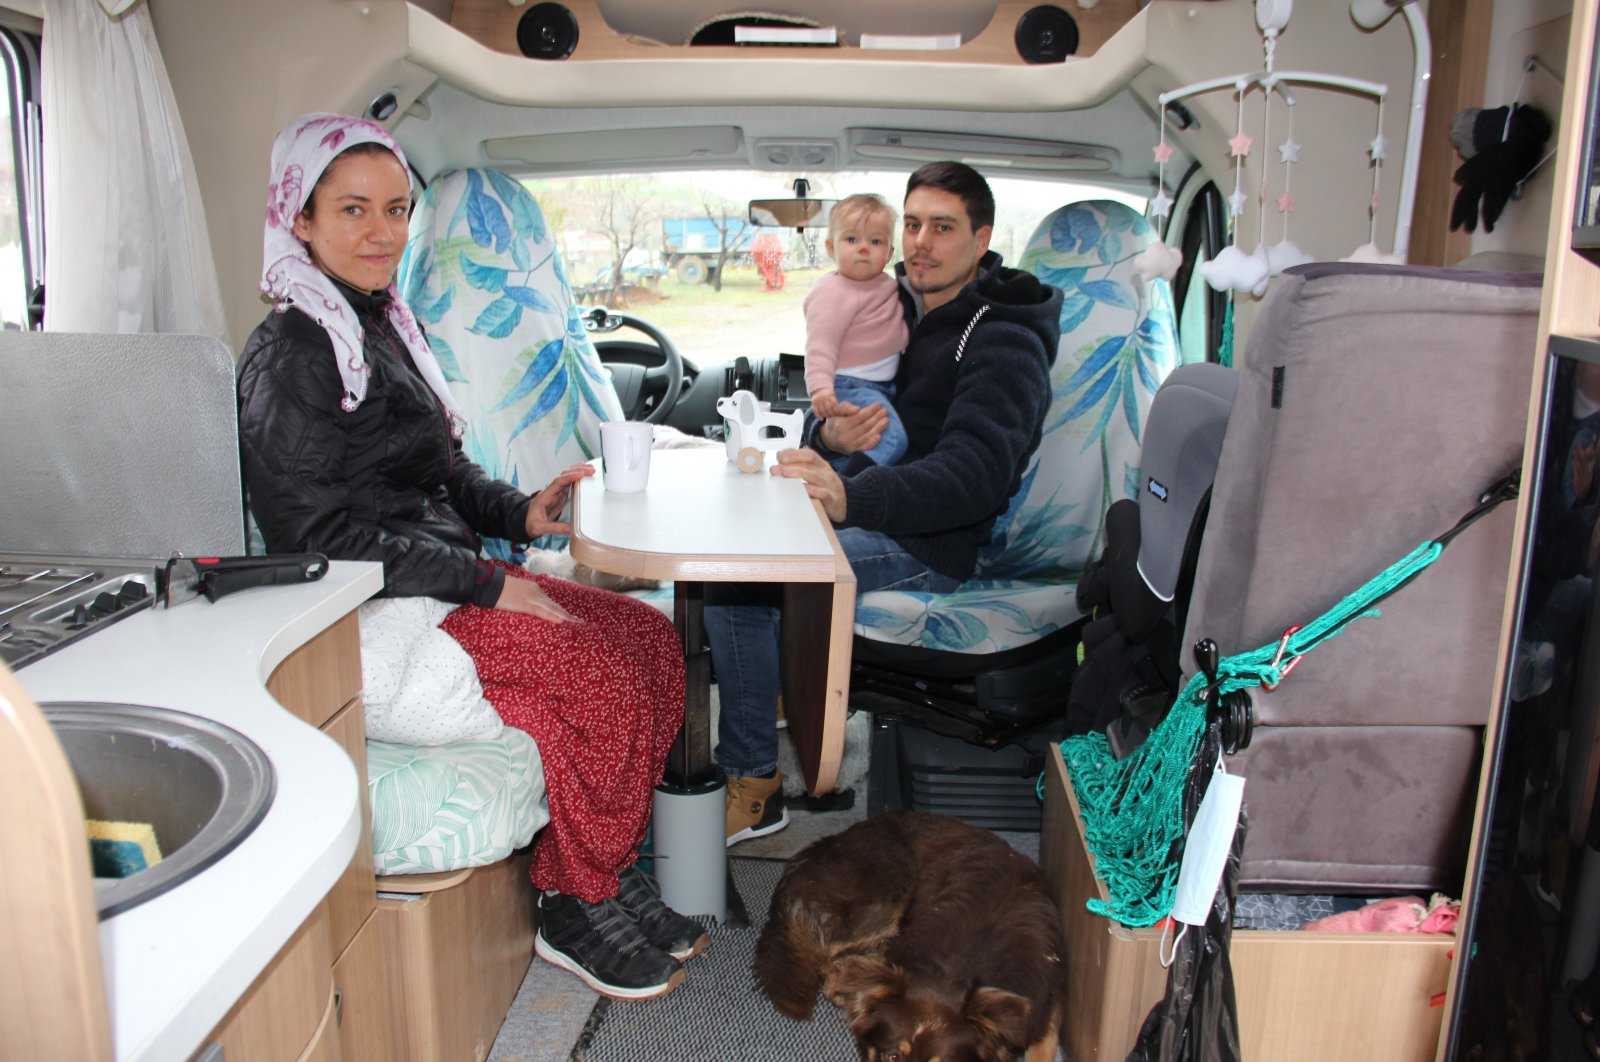 French tourists Annaelle Le Gall and Bastien Tardivel and their baby, Tiana Tardivel Le Gall, are seen in traditional eastern-Turkishwares in their Caravan at Yenigüven village of Adıyaman, Türkiye, Feb. 2, 2023. (IHA Photo)